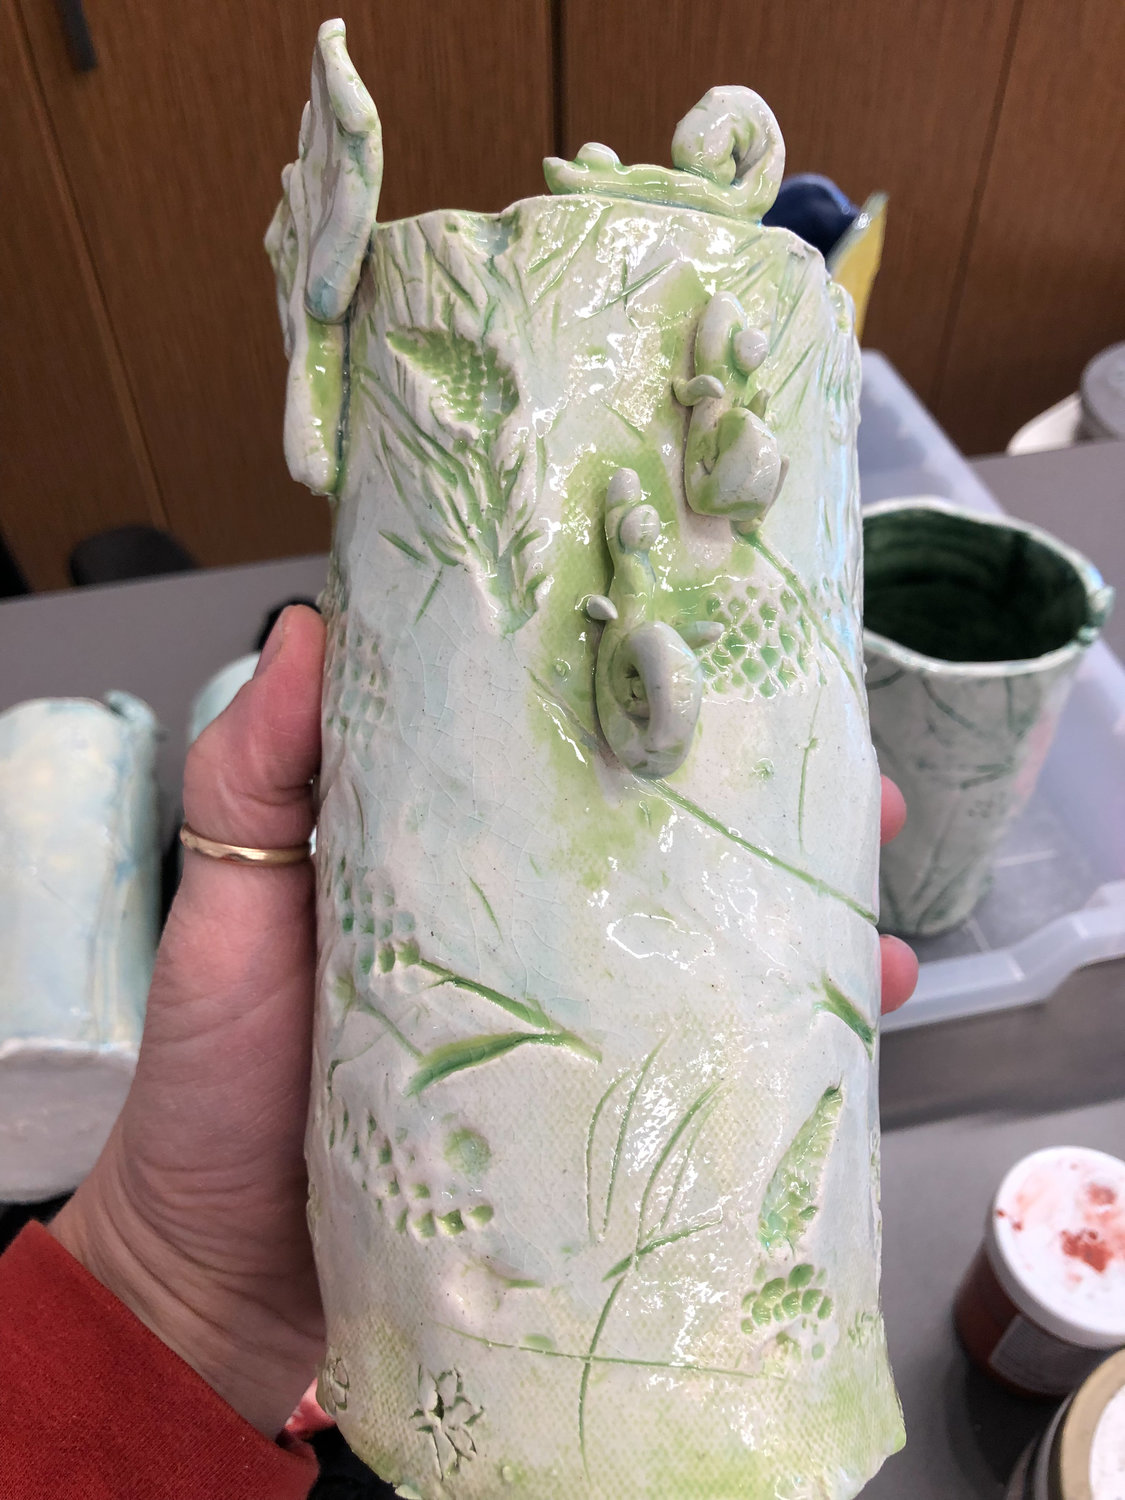 A vase made by a student at View Ridge Middle School uses weeds and branches as an imprint.